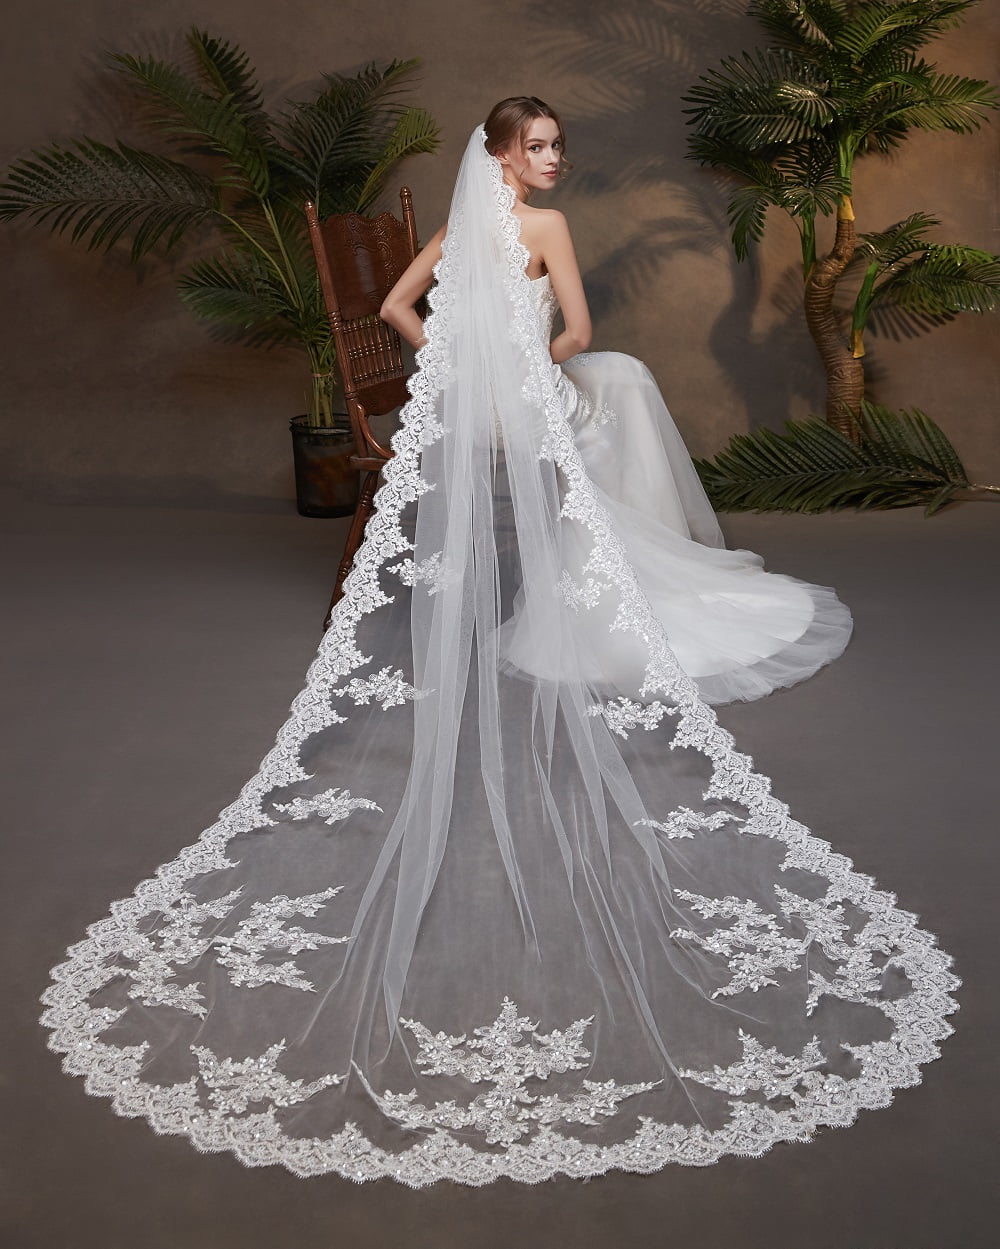 Luxury Handmade 1 Tier Pearl Veil With Beaded Trim Romantic Cathedral  Length With Soft Tulle And Cut Edge 3m Length 314G From Mianlo44, $30.7